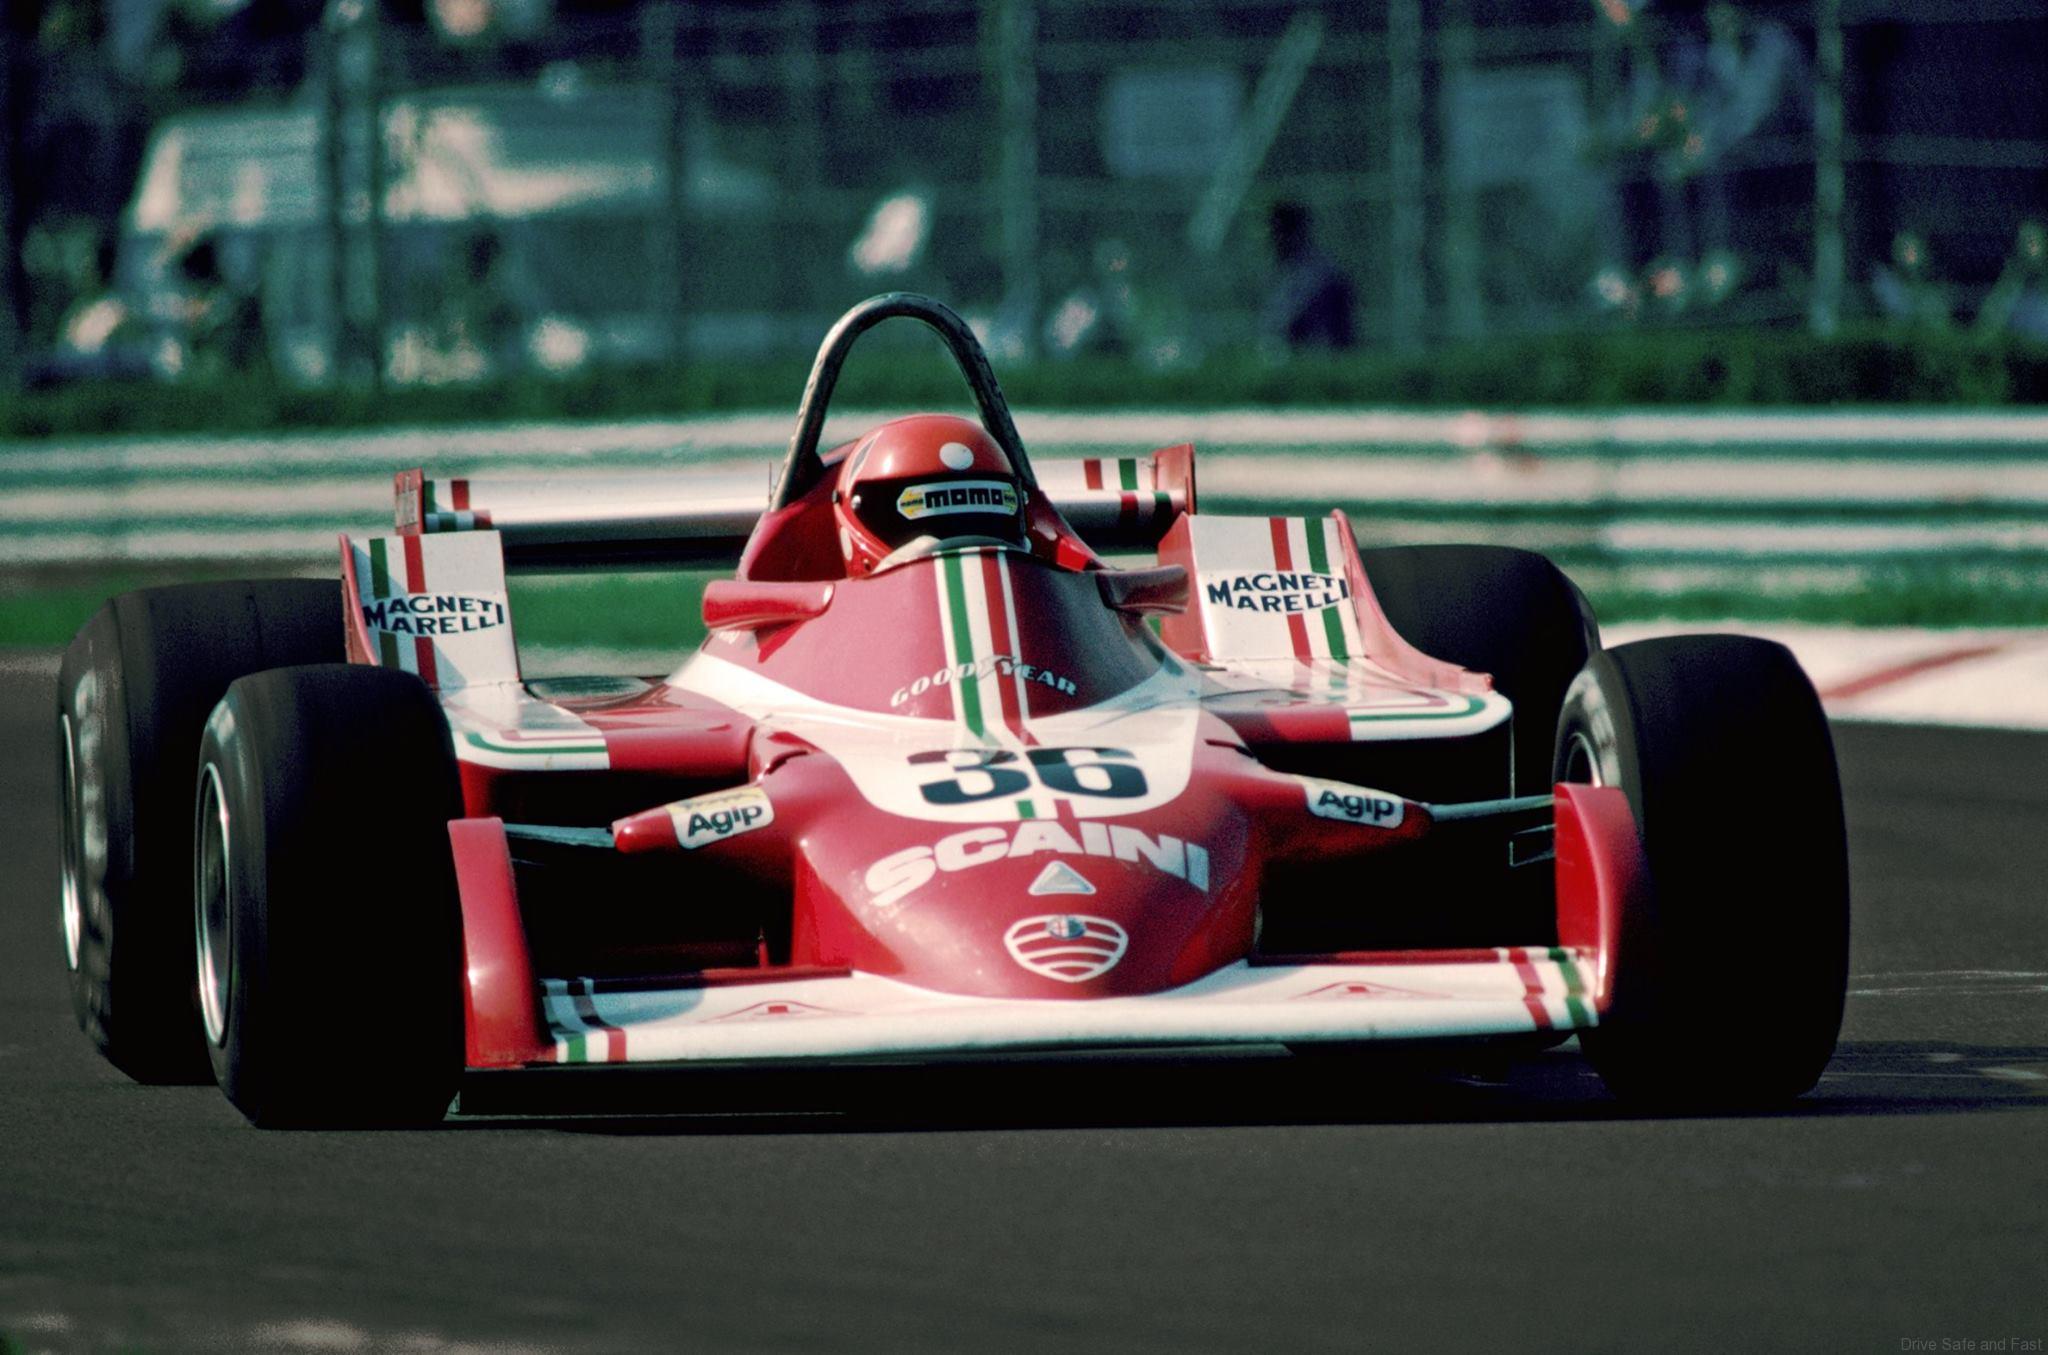 Alfa Romeo returns to F1 after 30 years – Drive Safe and Fast